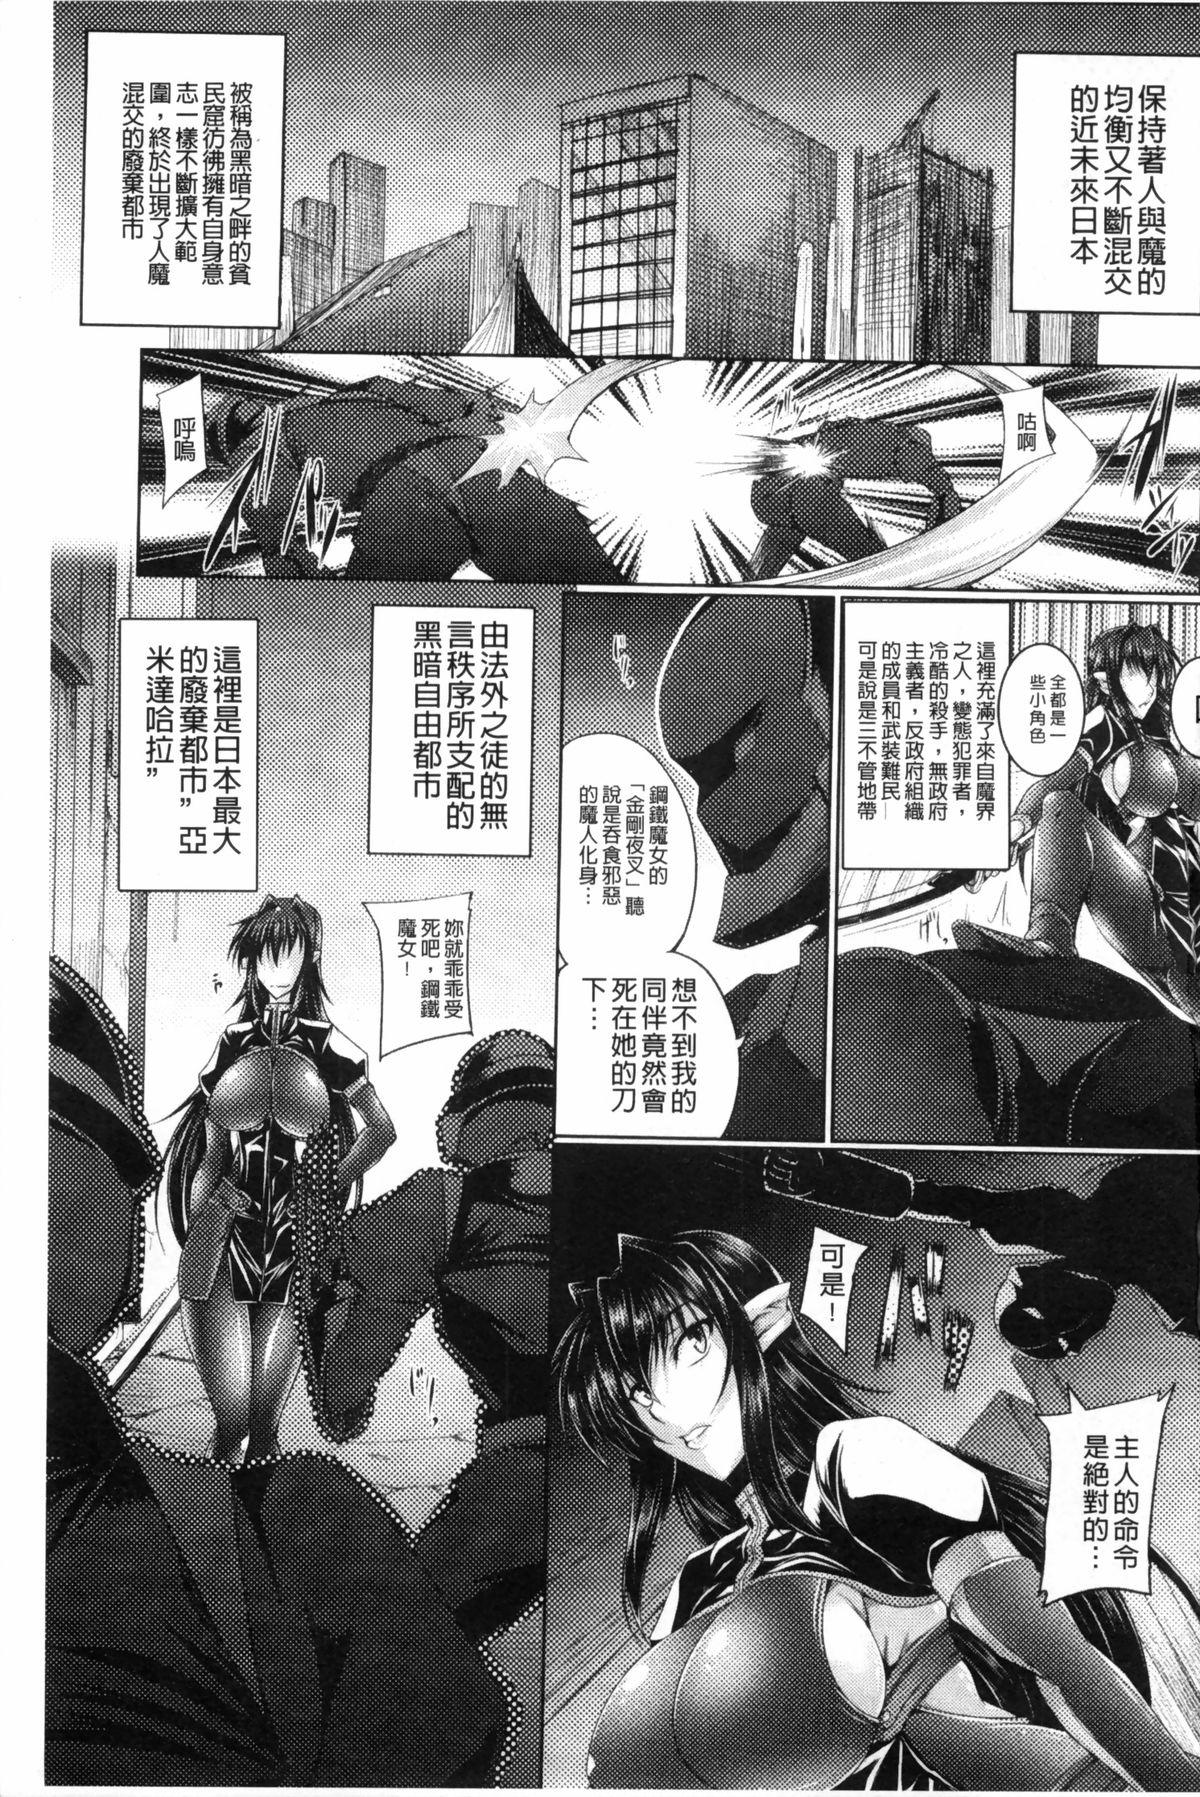 18 Year Old Porn 鋼鉄の魔女アンネローゼ ～淫虐の魔娼婦～ - Koutetsu no majo annerose Free Amateur - Page 4